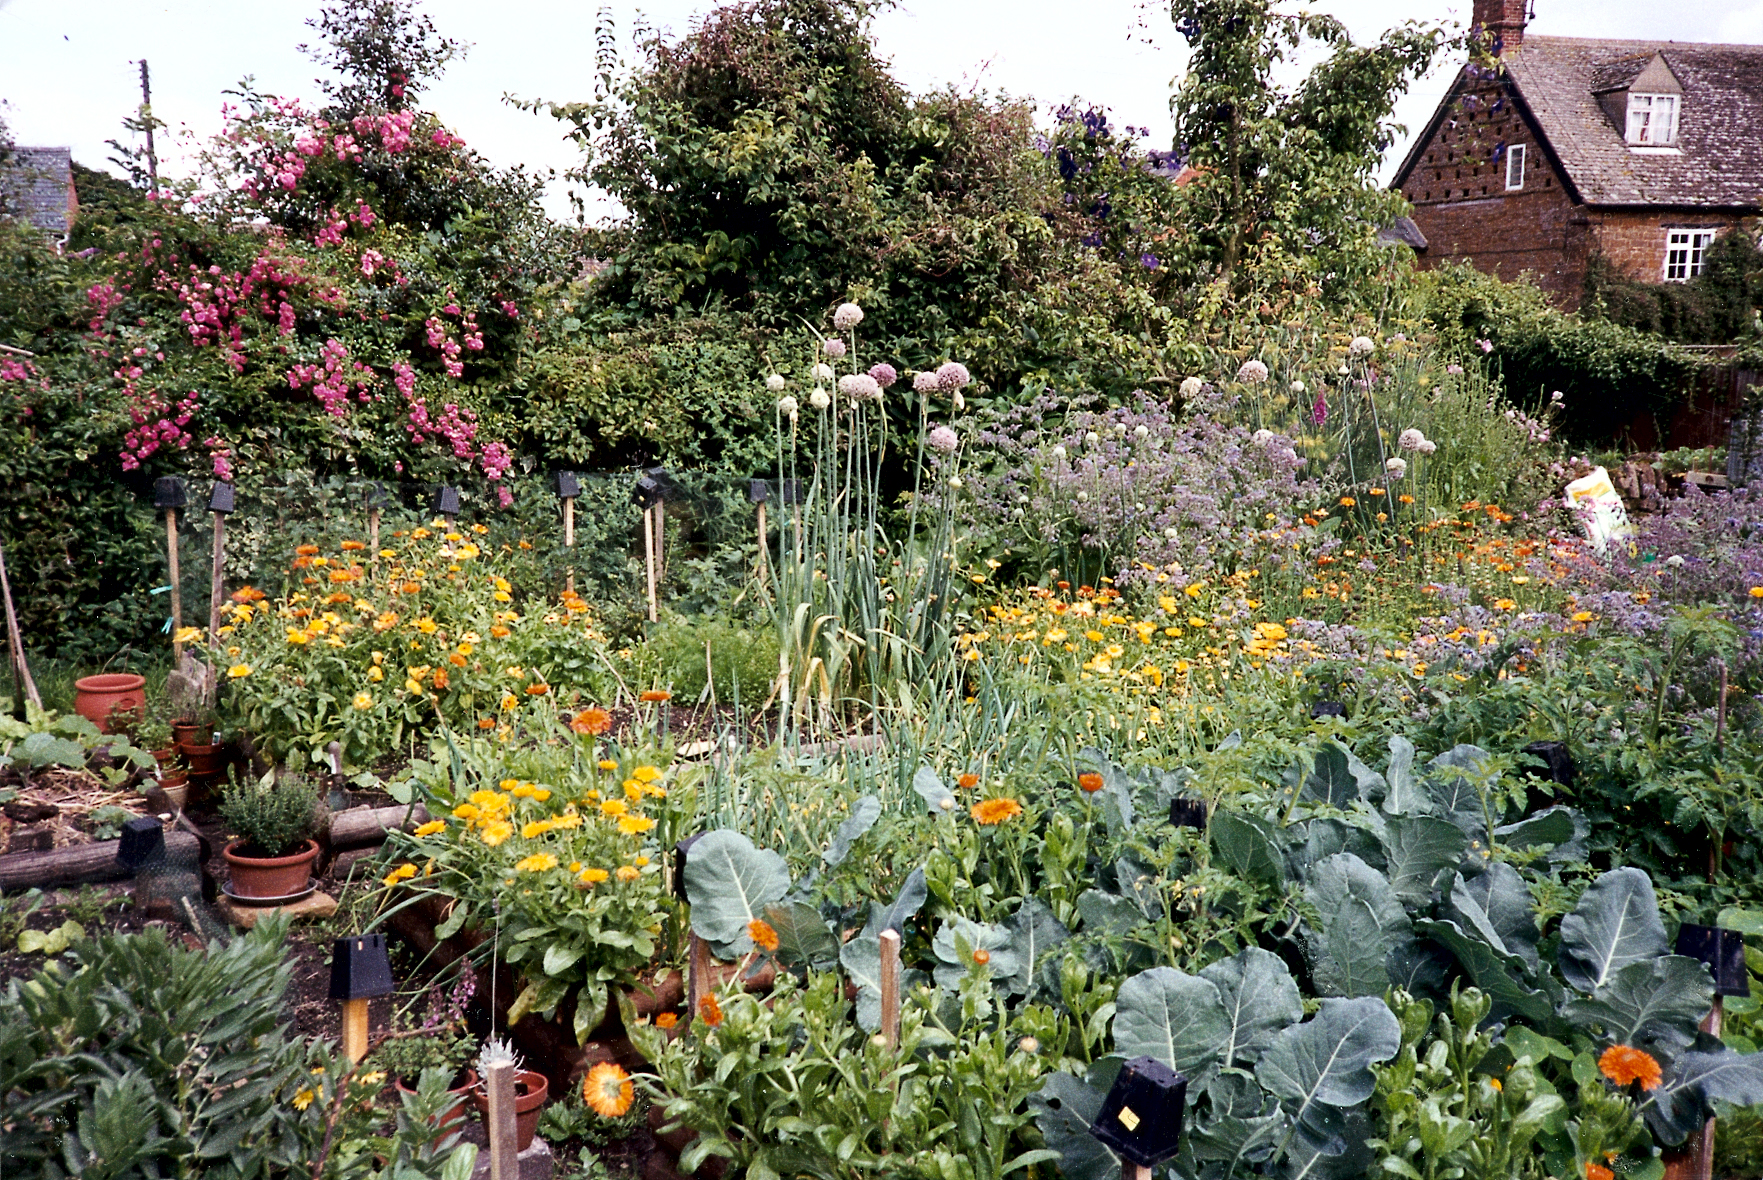 Six raised beds with edible produce crammed into every spare inch of ground